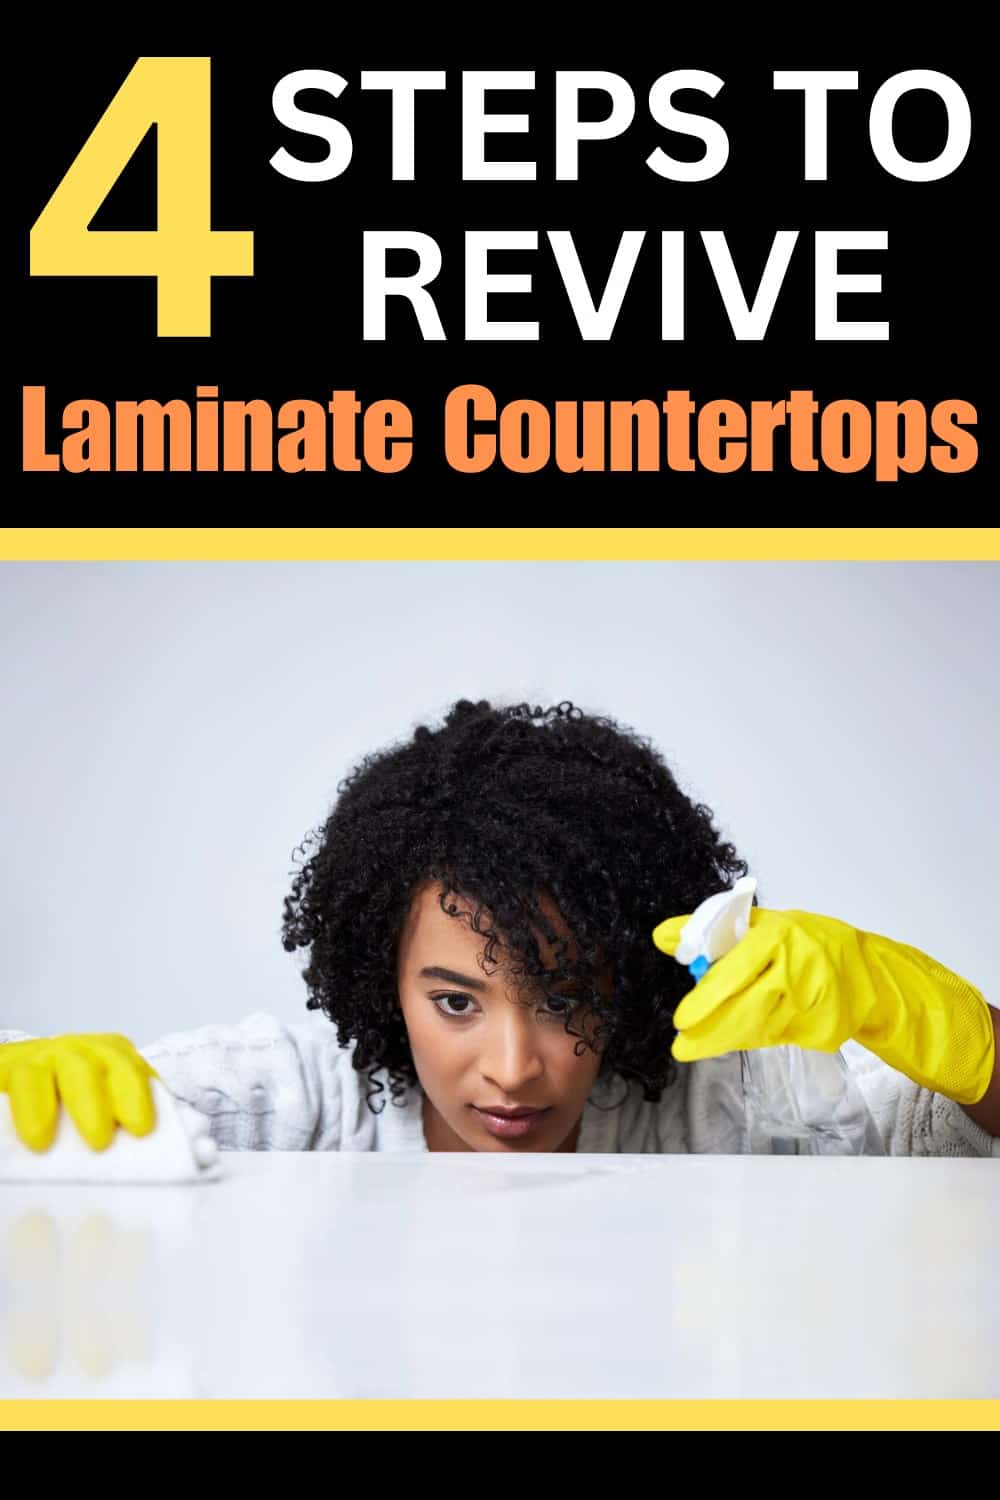 Guide to reviving Laminate Counters